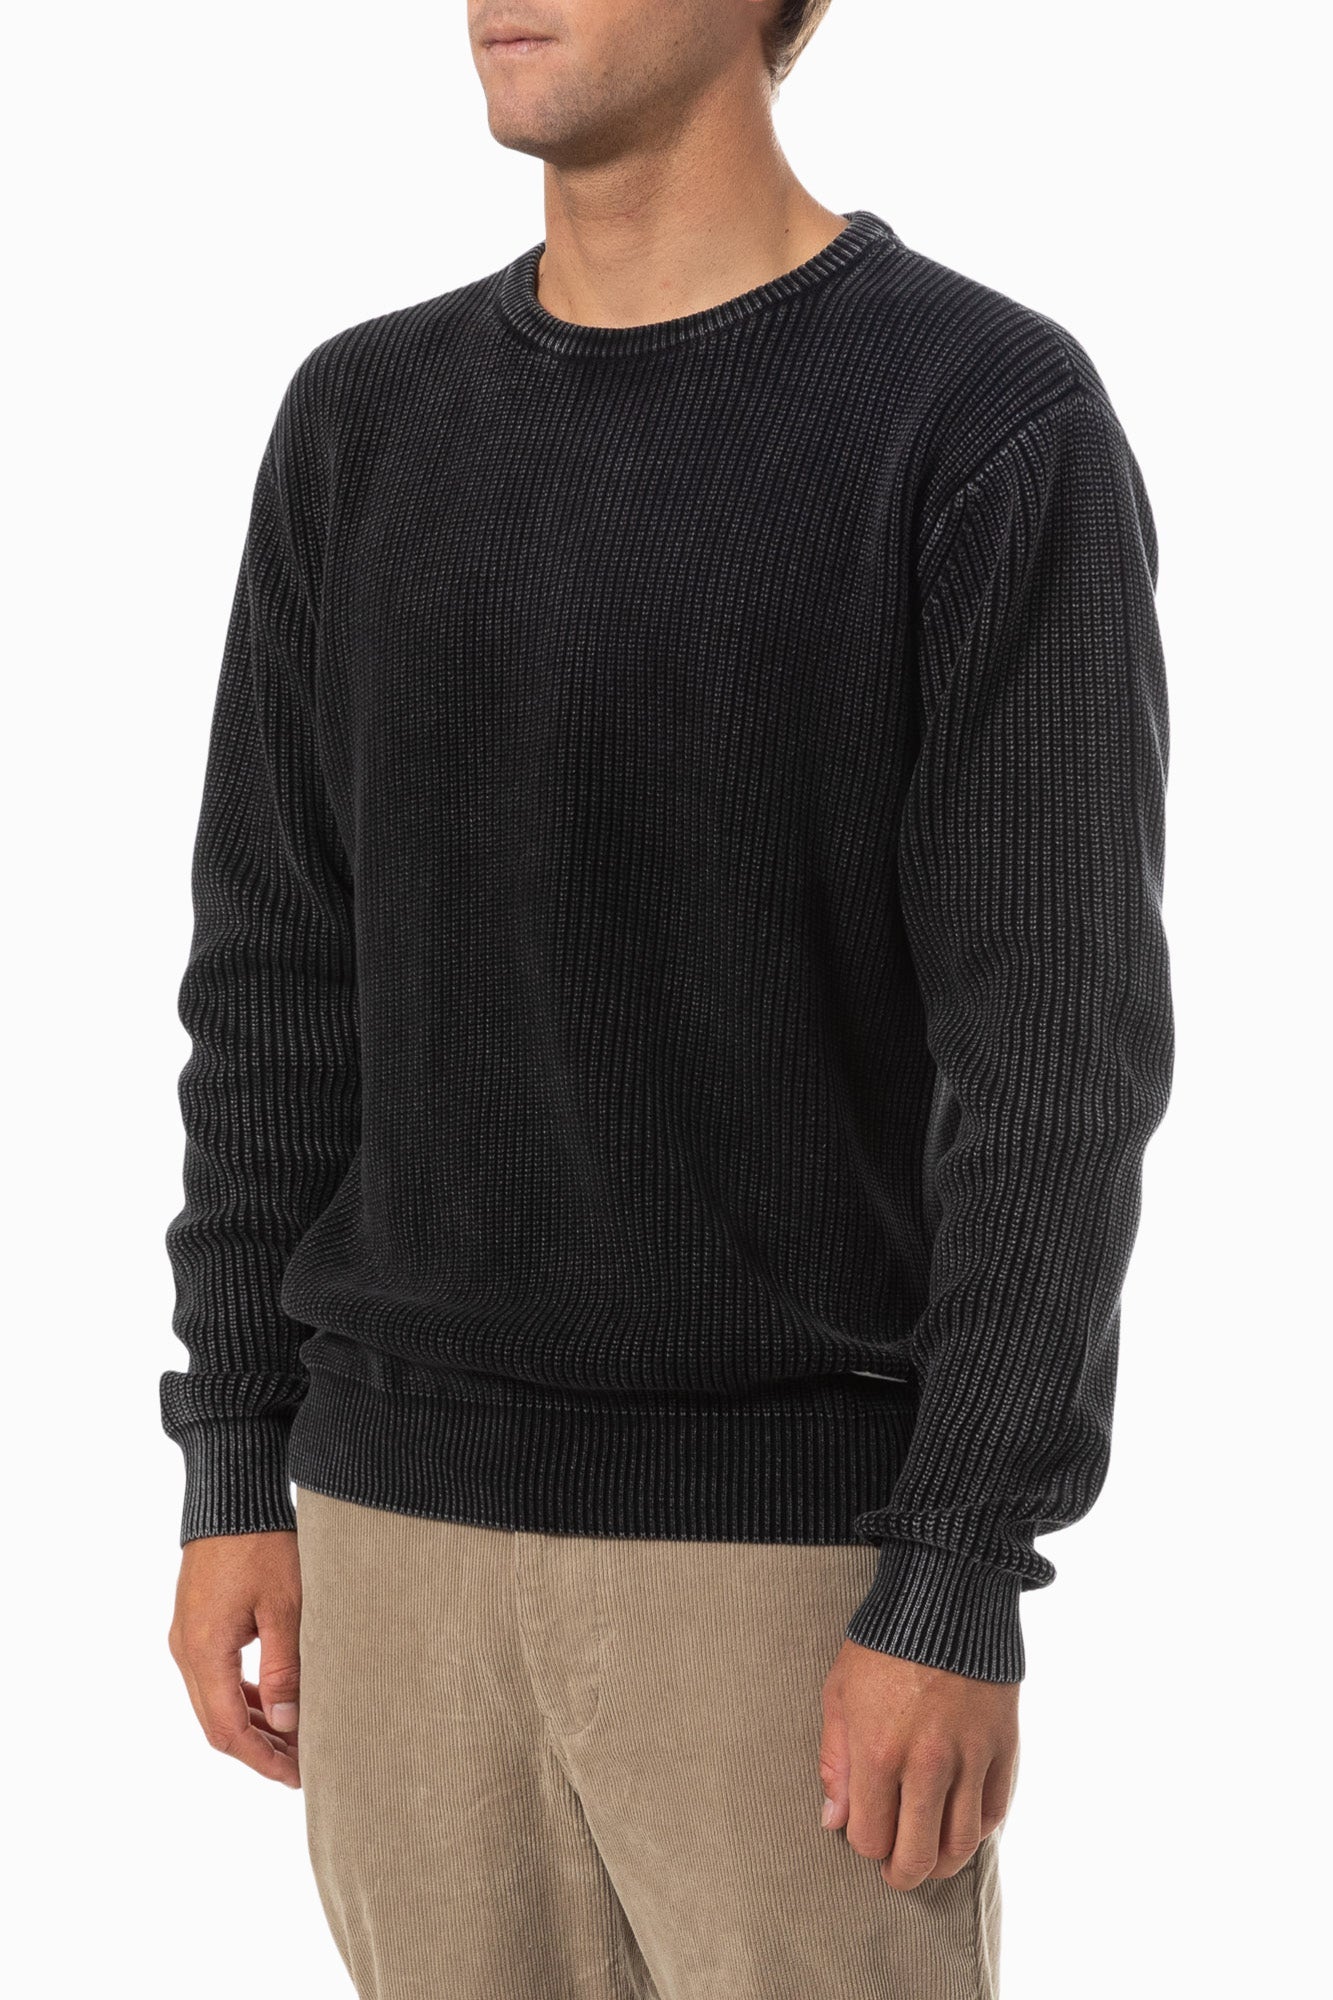 SWELL SWEATER